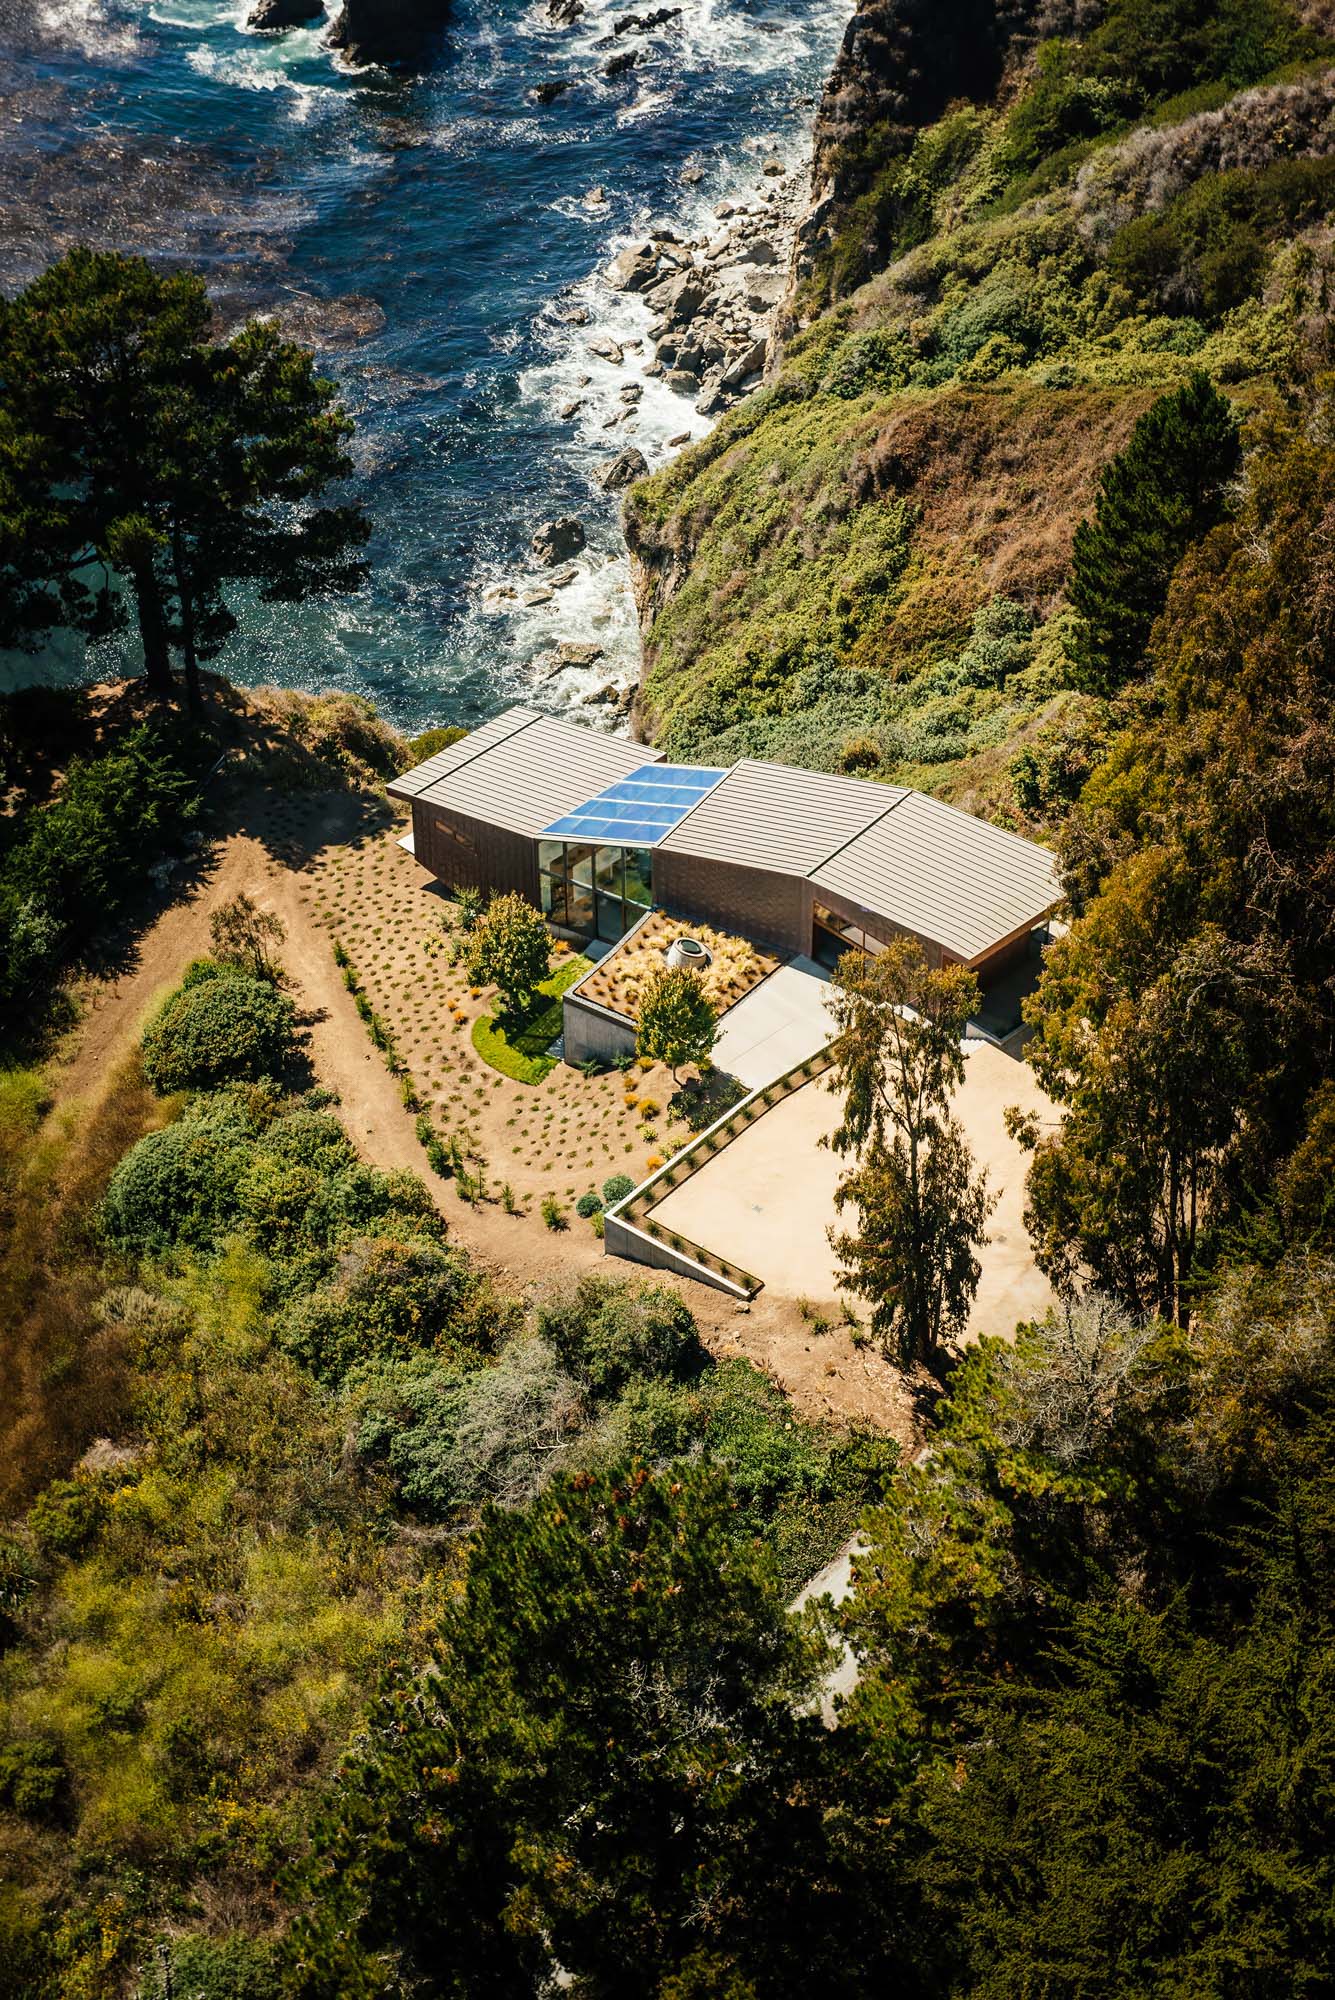 Fall House Luxury Residence – Cabrillo Hwy, Big Sur, CA, USA